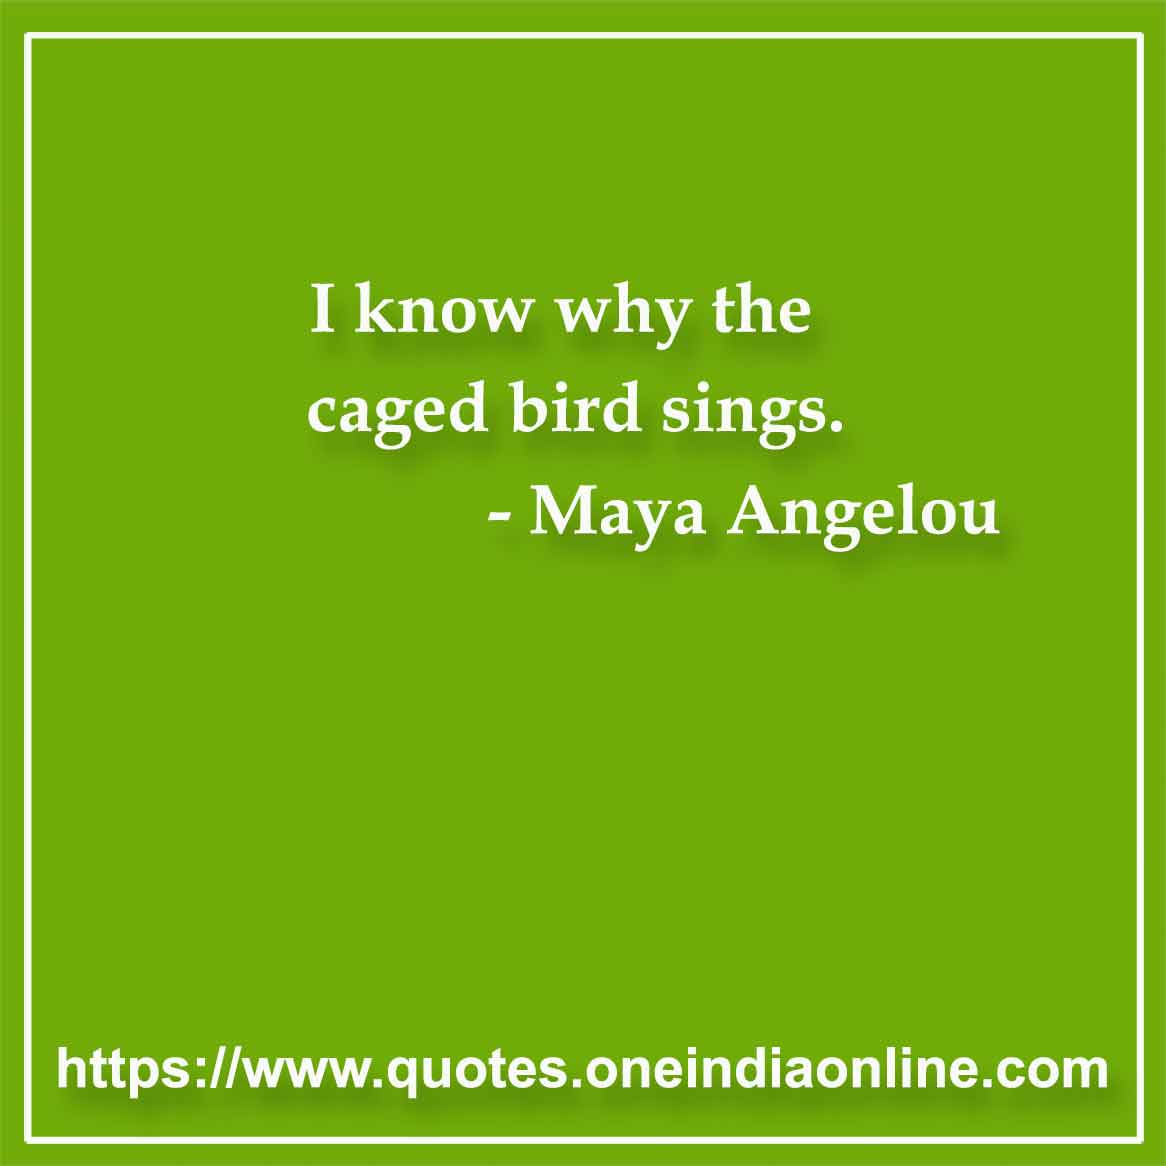 I know why the caged bird sings. Maya Angelou